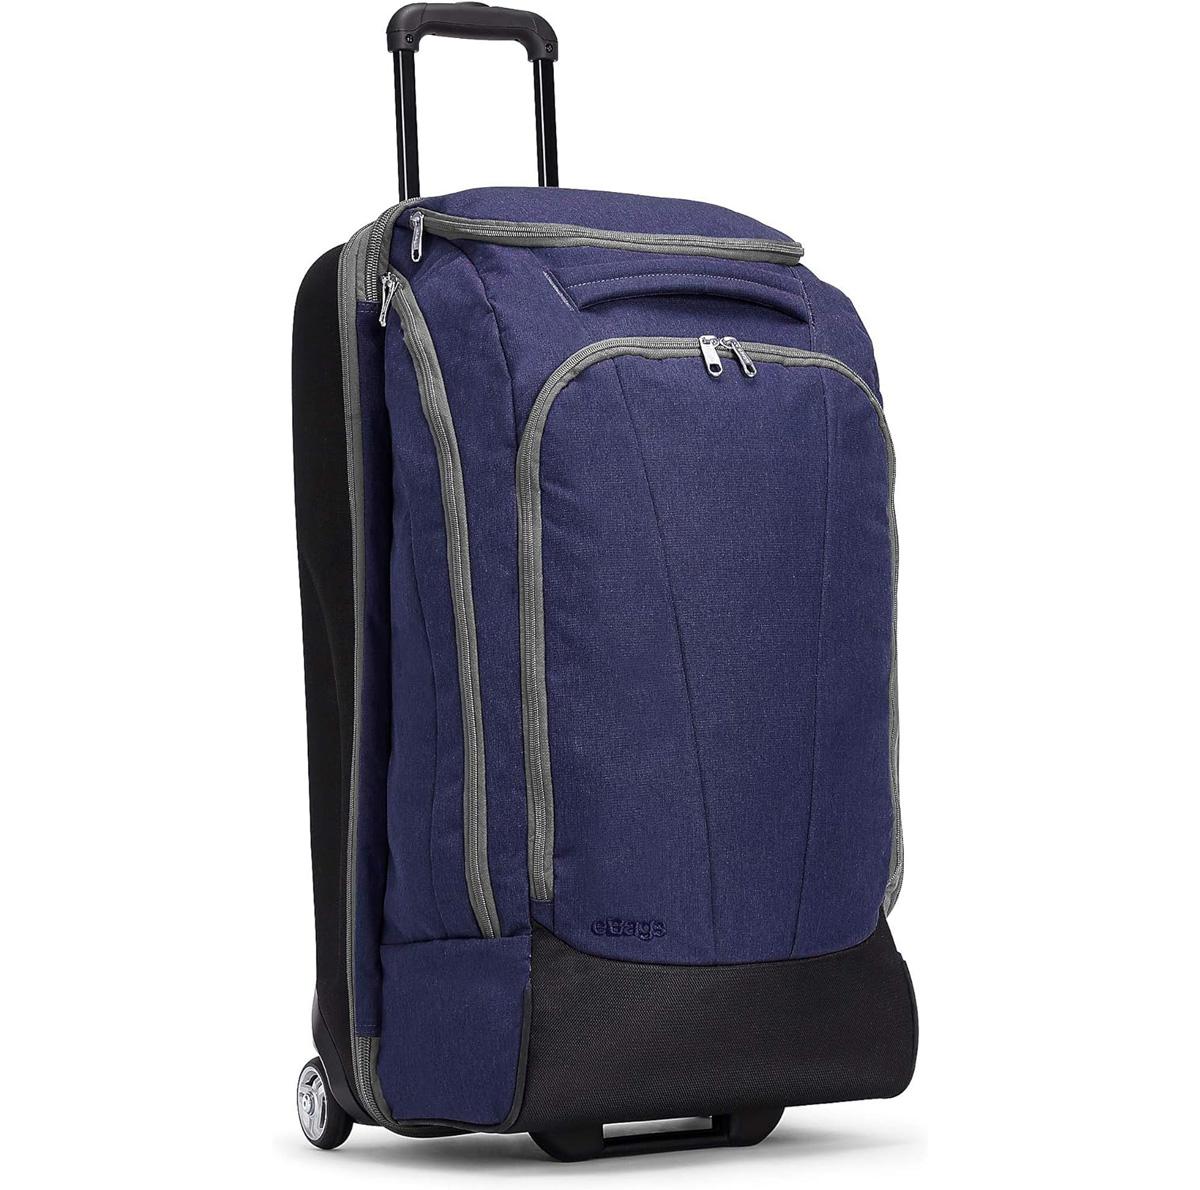 eBags 29in Mother Lode Checked Rolling Duffel Luggage for $60 Shipped